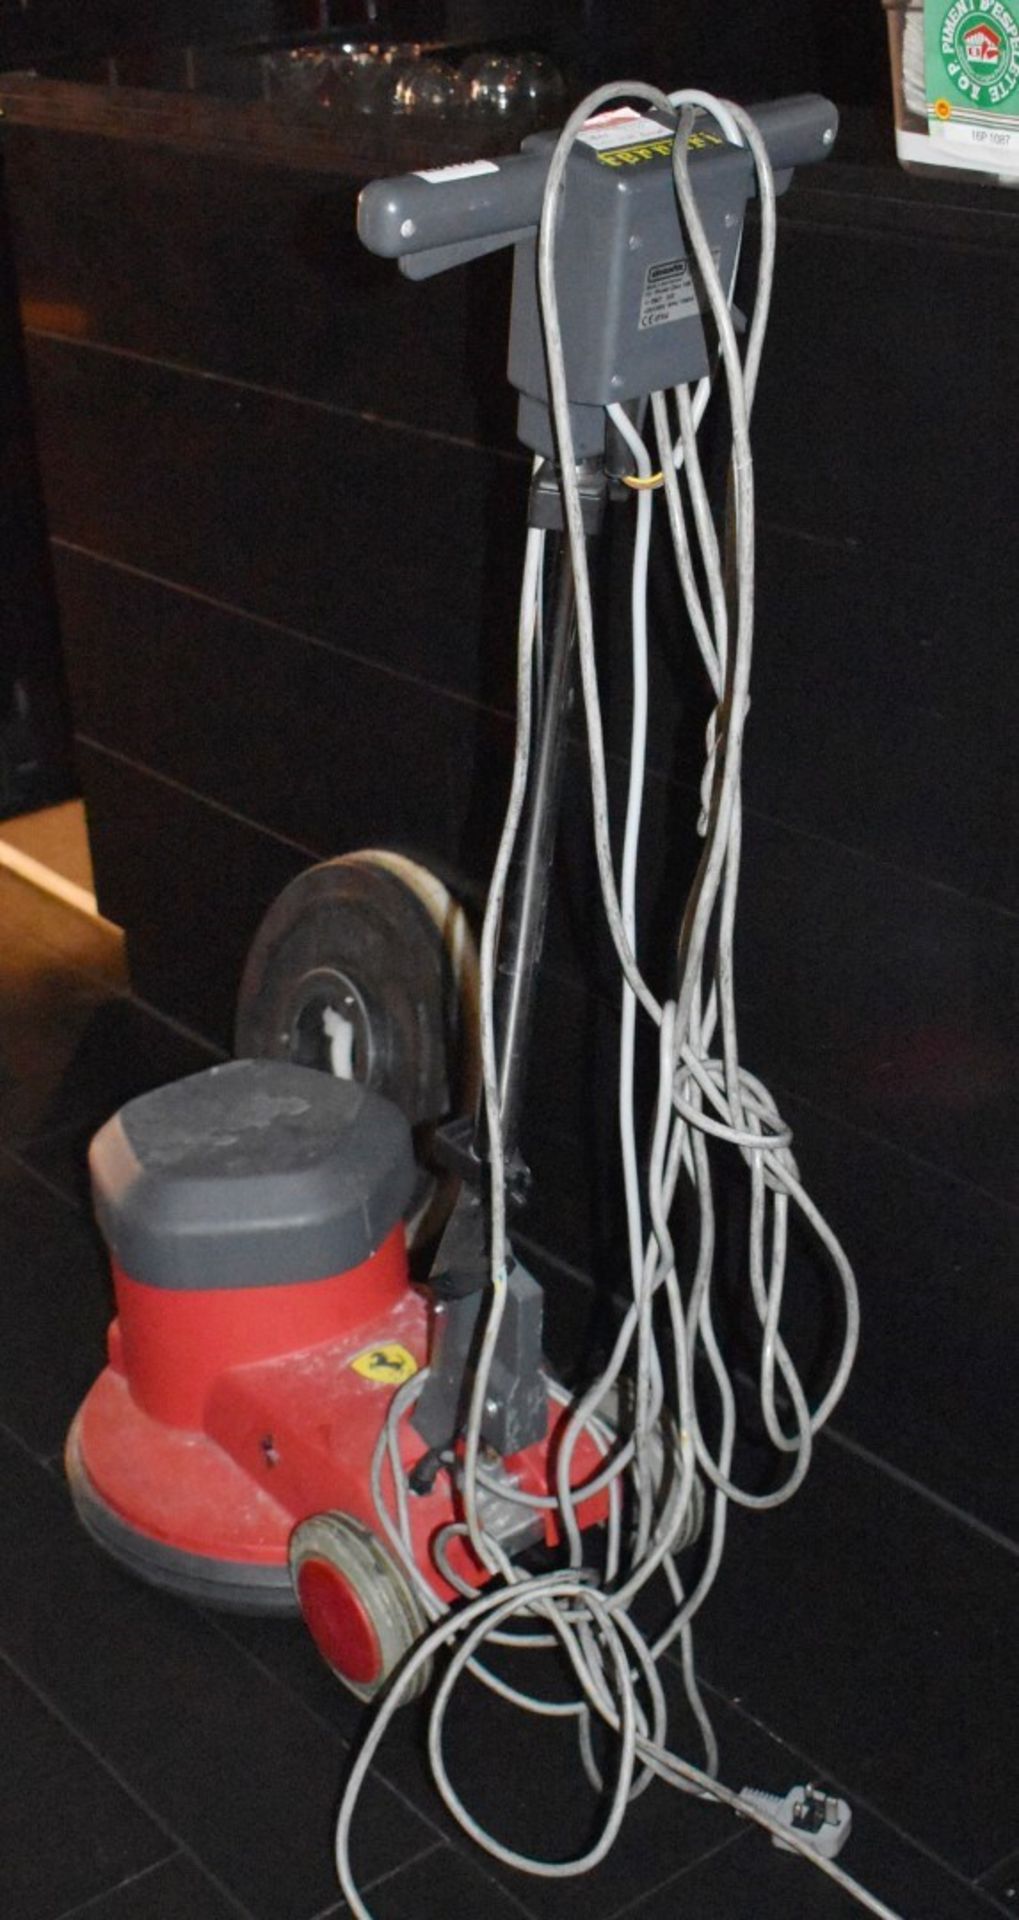 1 x Cleanfix 'POWER DISC 165' Commercial Floor Cleaner - Swiss Made - CL392 - Ref LD176 - - Image 4 of 4